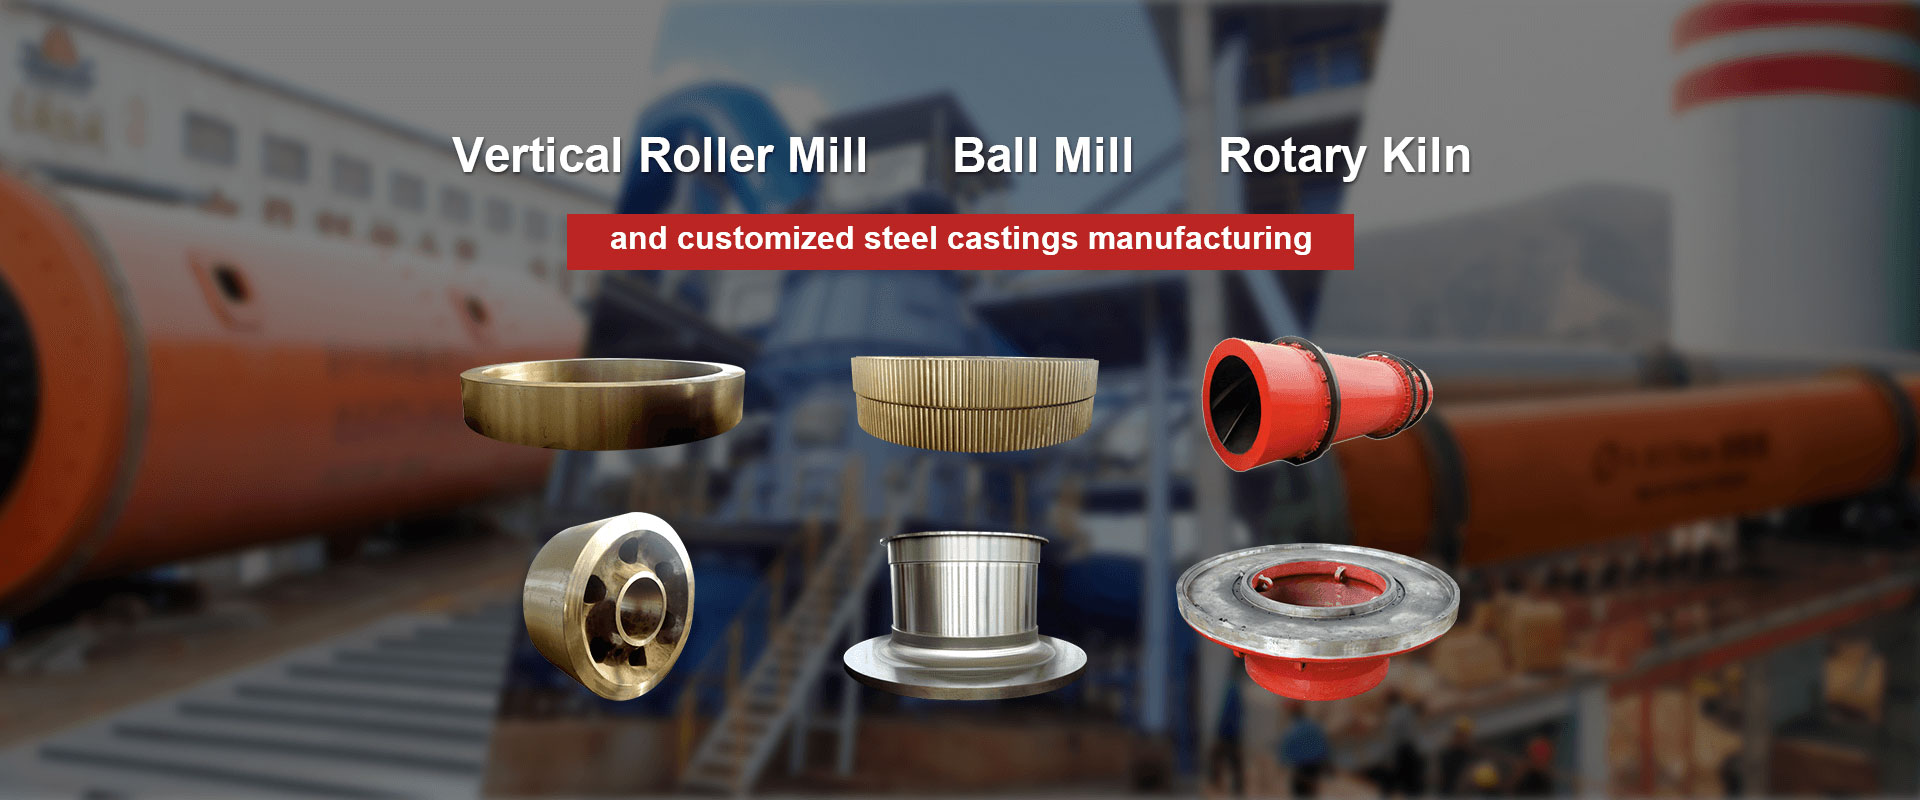 Cement machinery parts